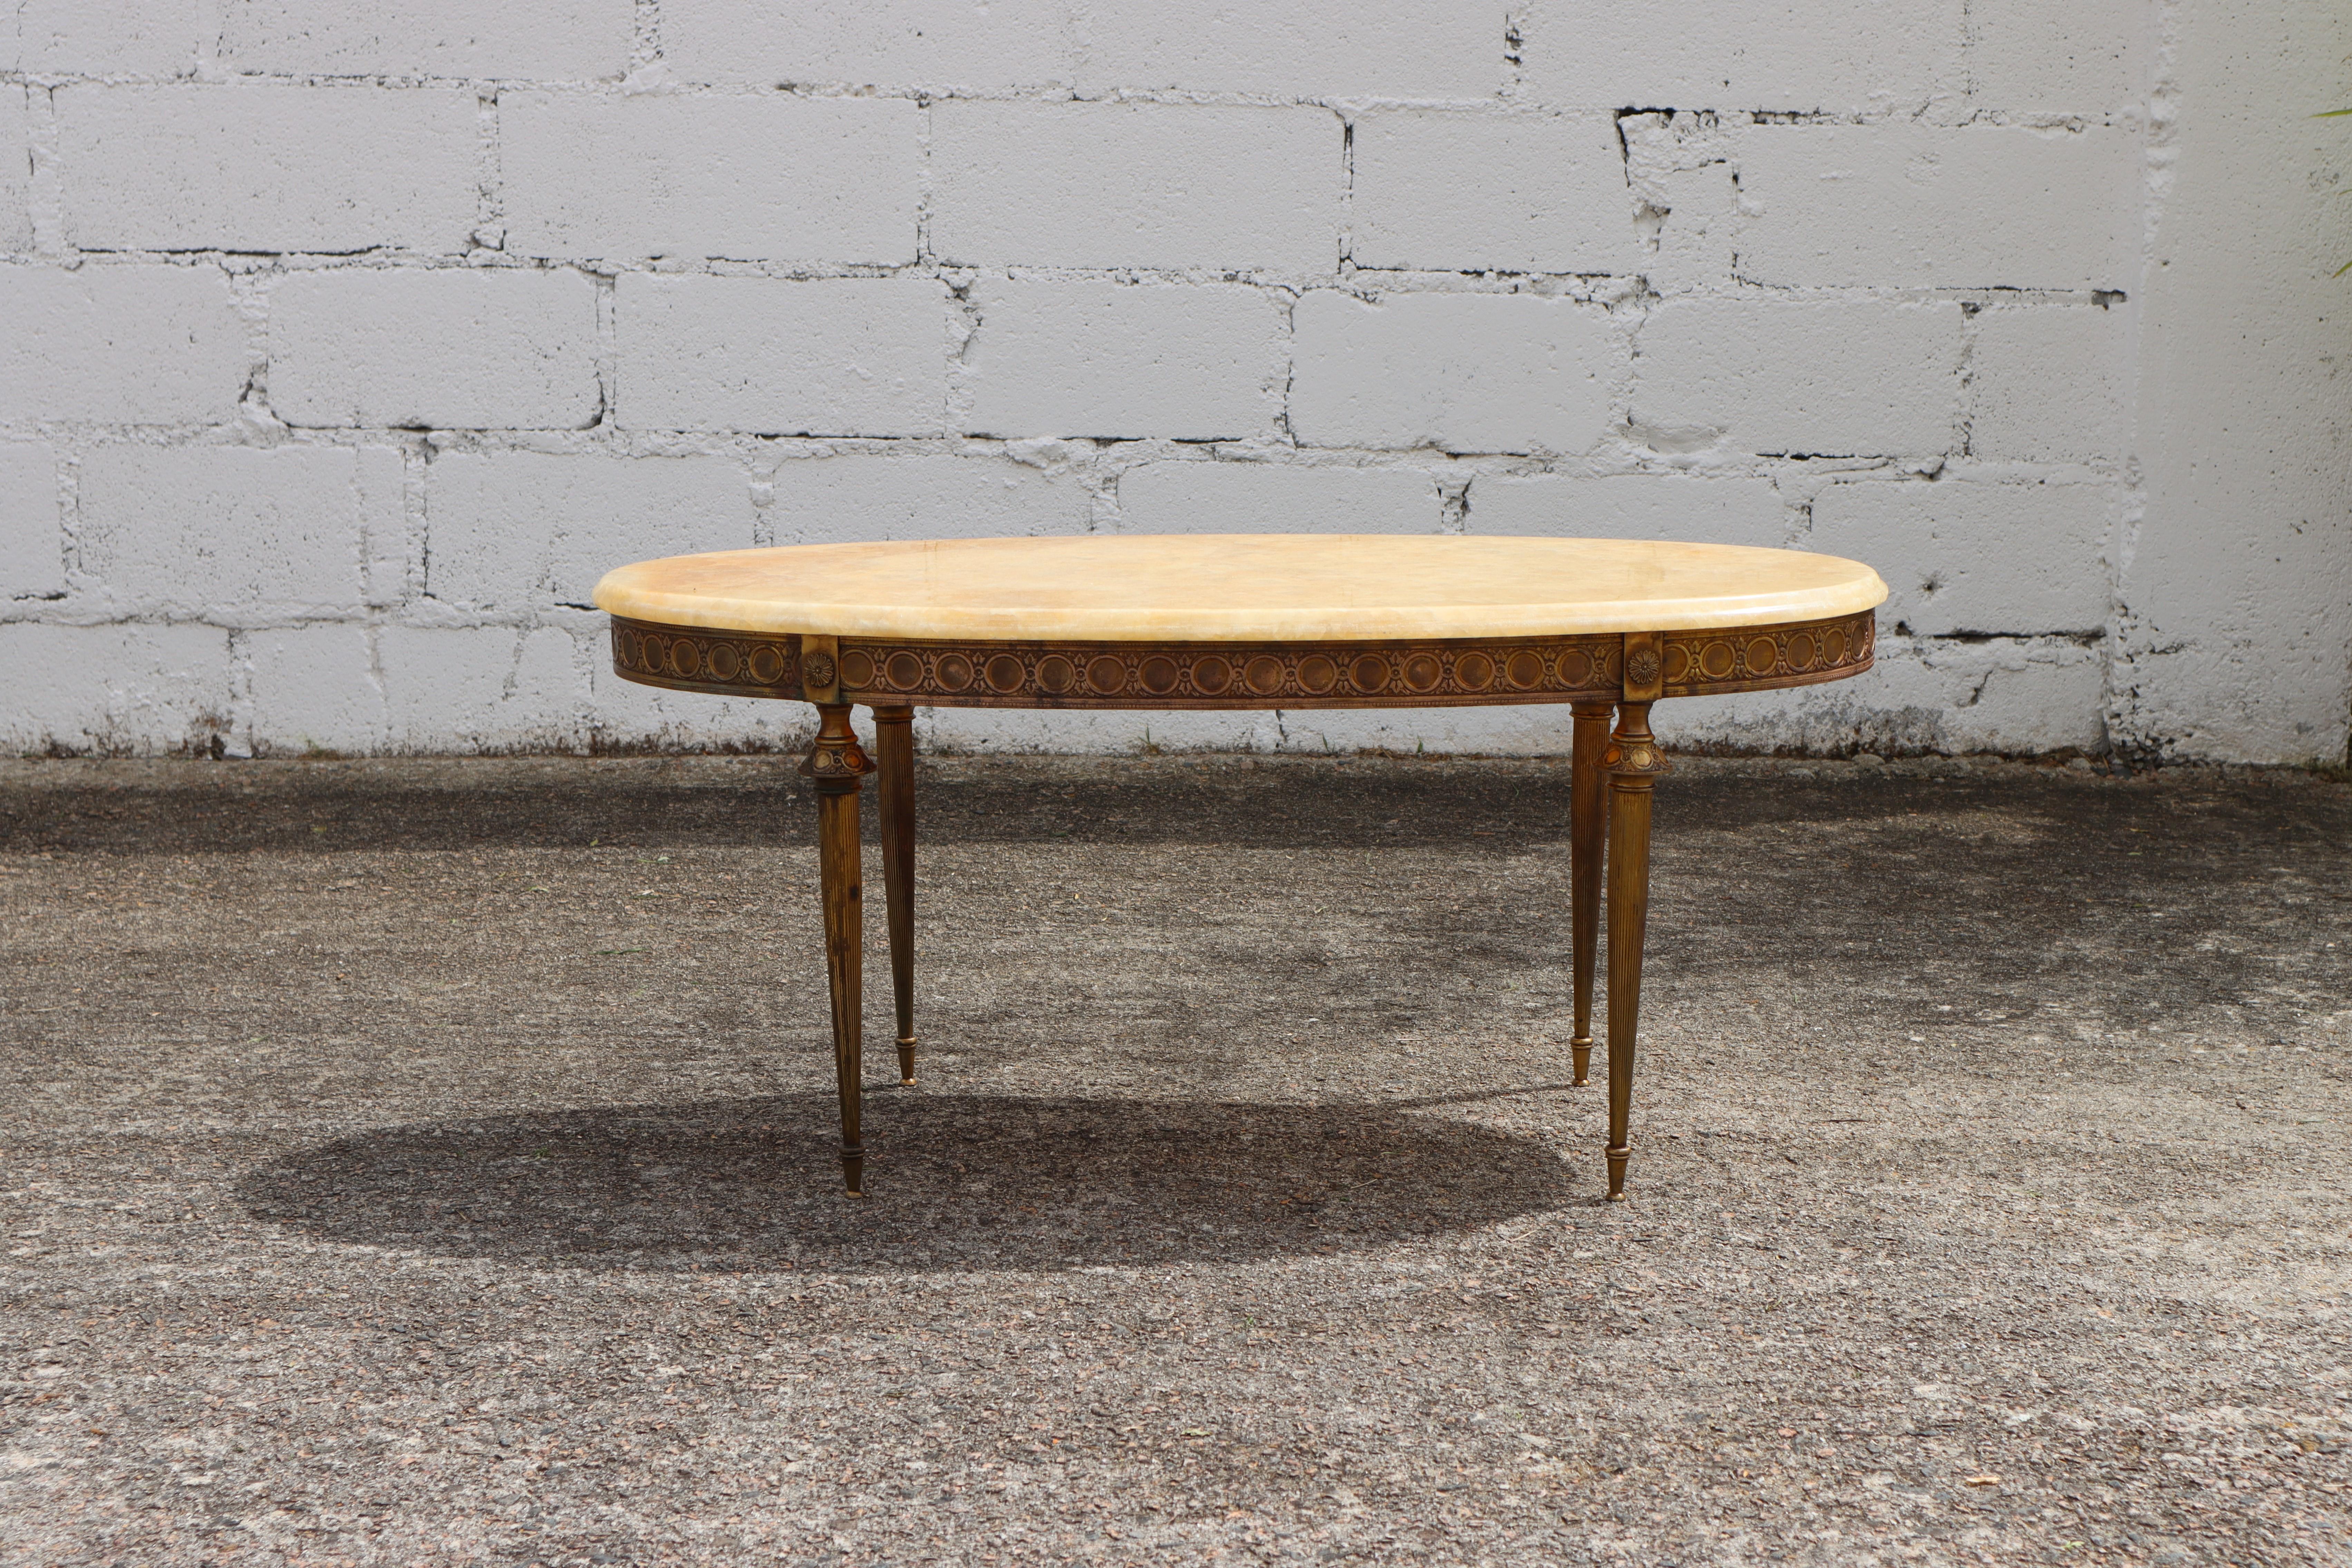 French Vintage Marble and Brass Coffee Table - Lounge Table - Cocktail Table Emporium Style from the 70s

Massive Oval Marble Table Top with all-round decorative Edge

wonderful Colors : Clouds of light yellow,beige,pearl with some shiny